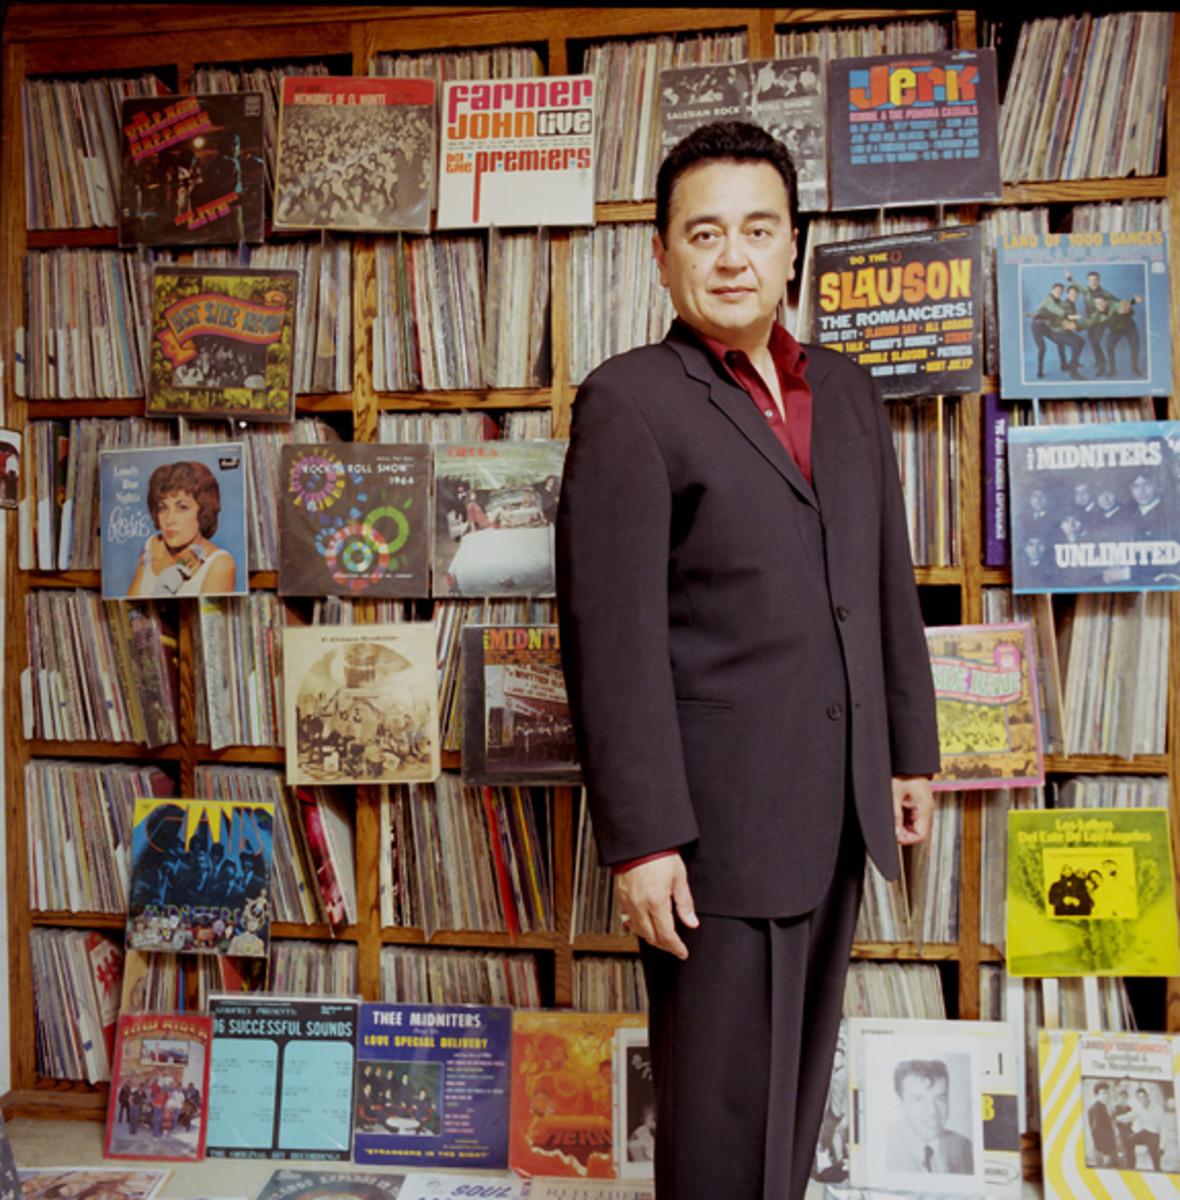 Goldmine reader and record collector Gene Aguilera